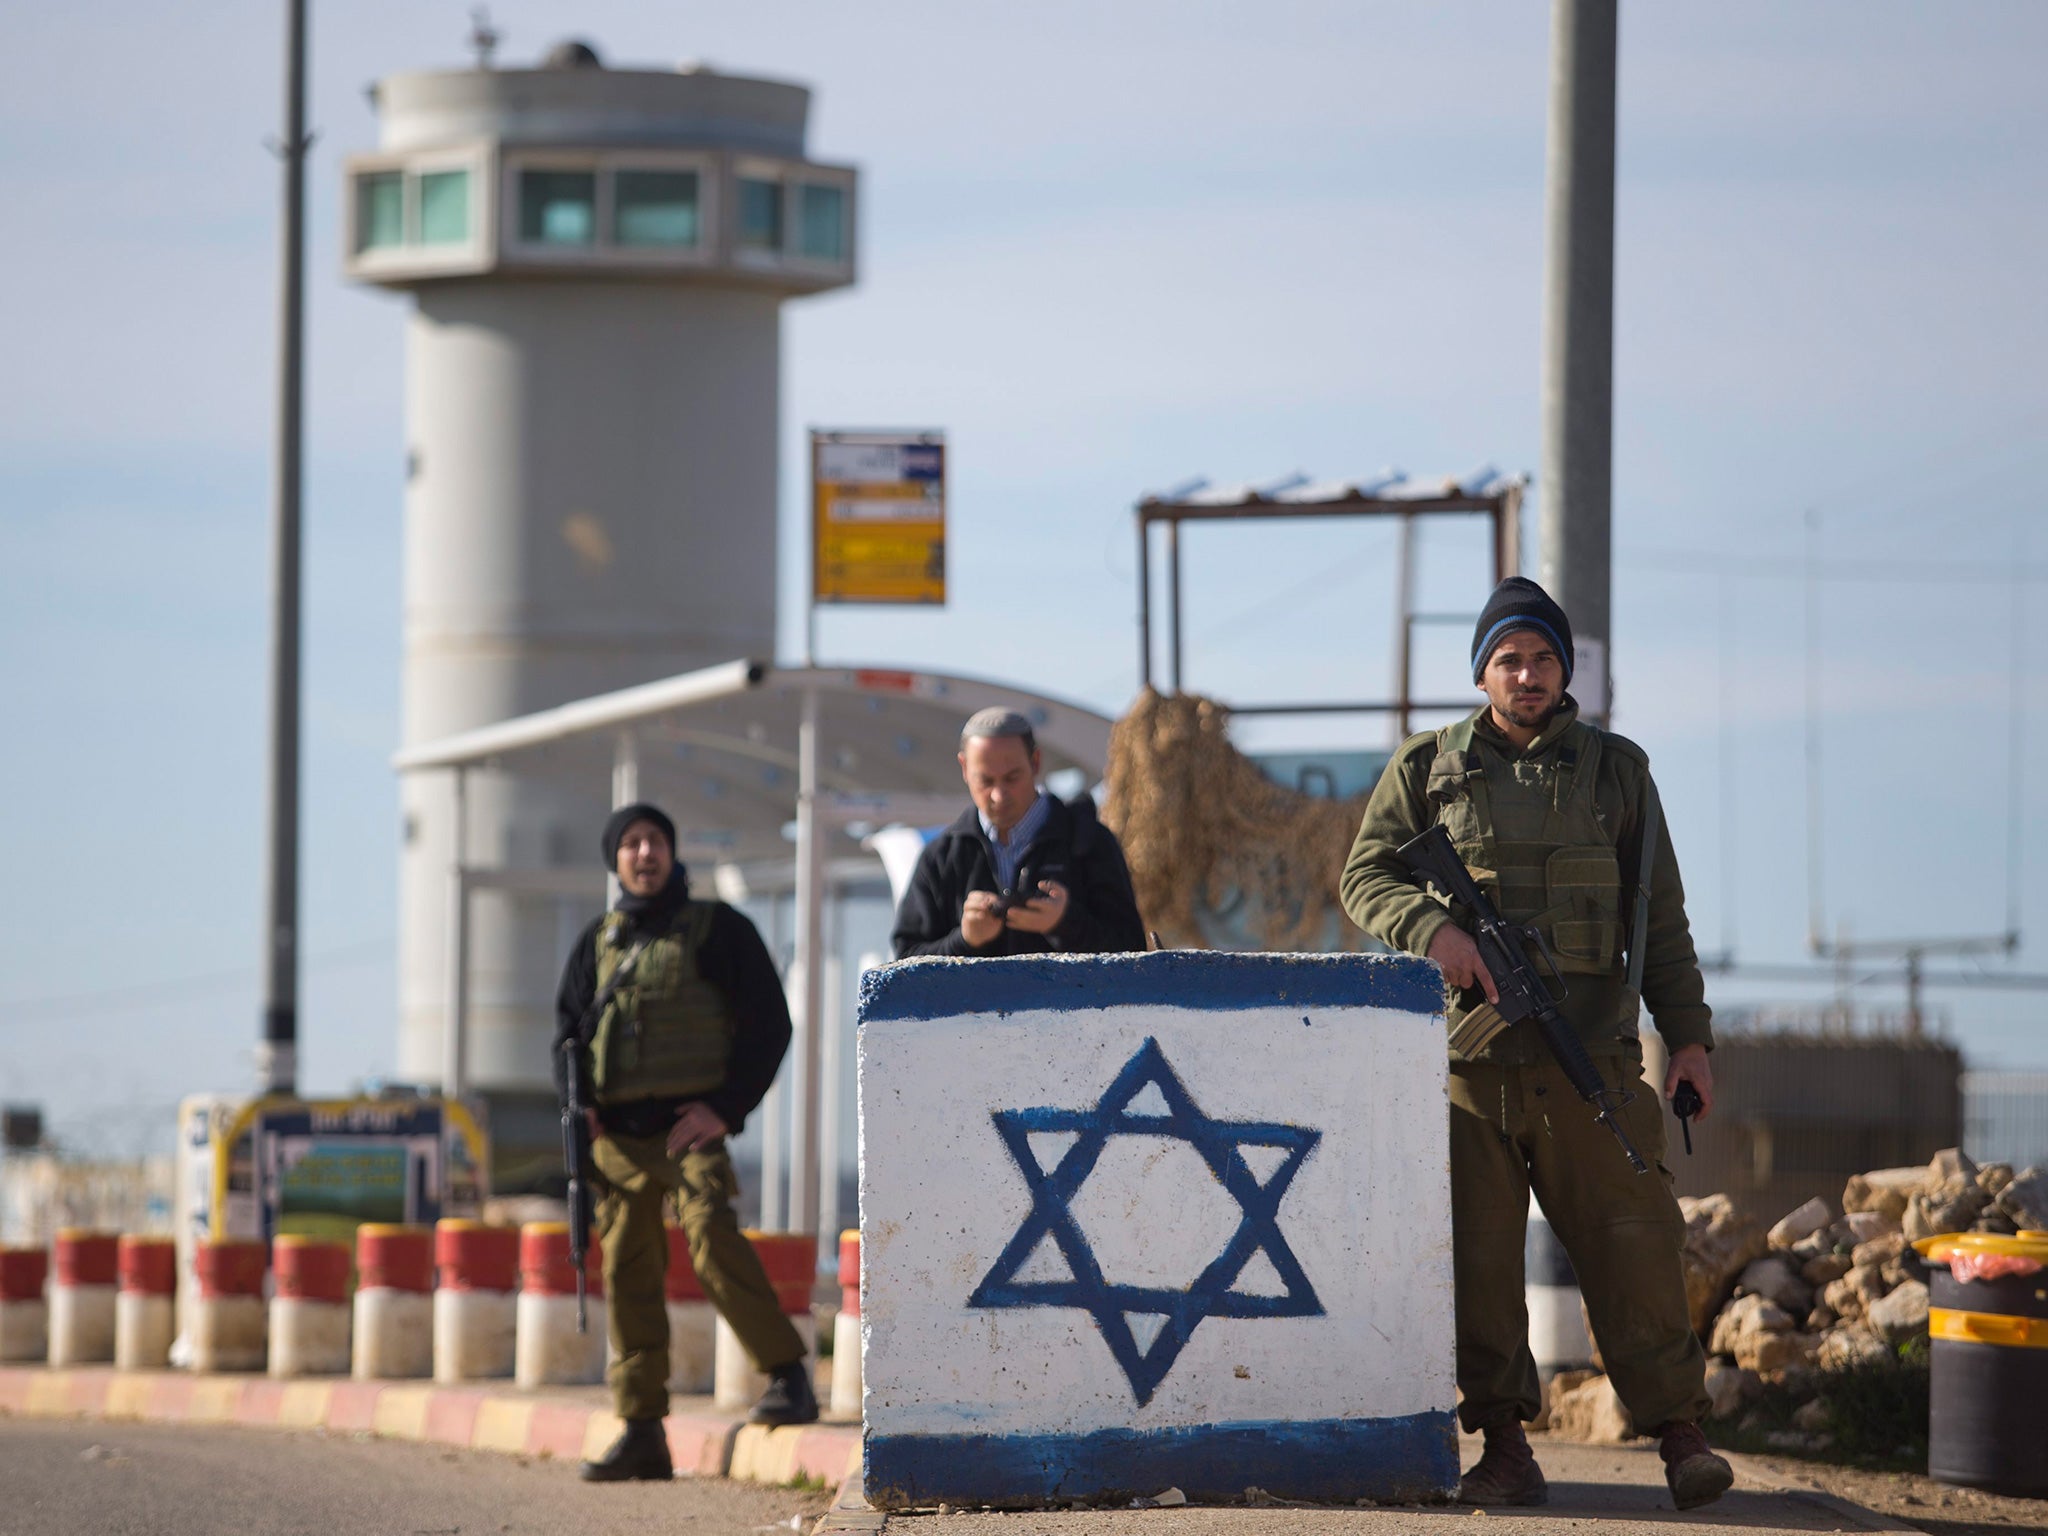 Armed Israeli soldiers stand at a junction near the central bus station in the Gush Etzion settlement. The area has been the focus of clashes.